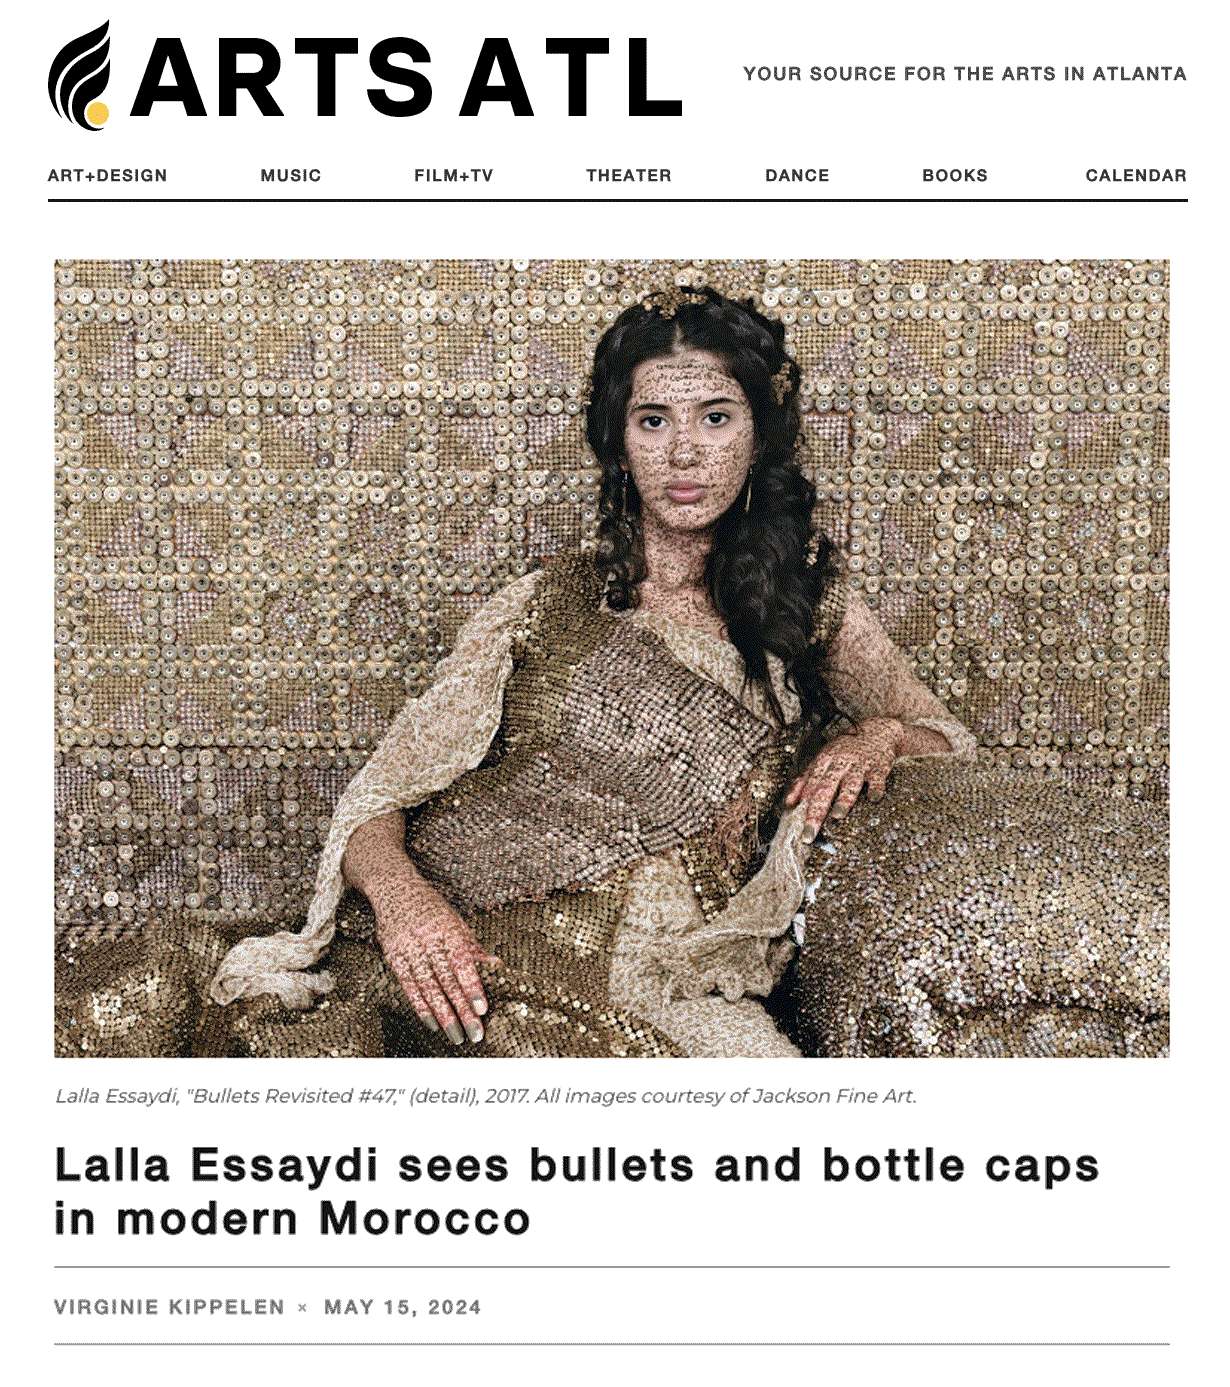 Lalla Essaydi sees bullets and bottle caps in modern Morocco